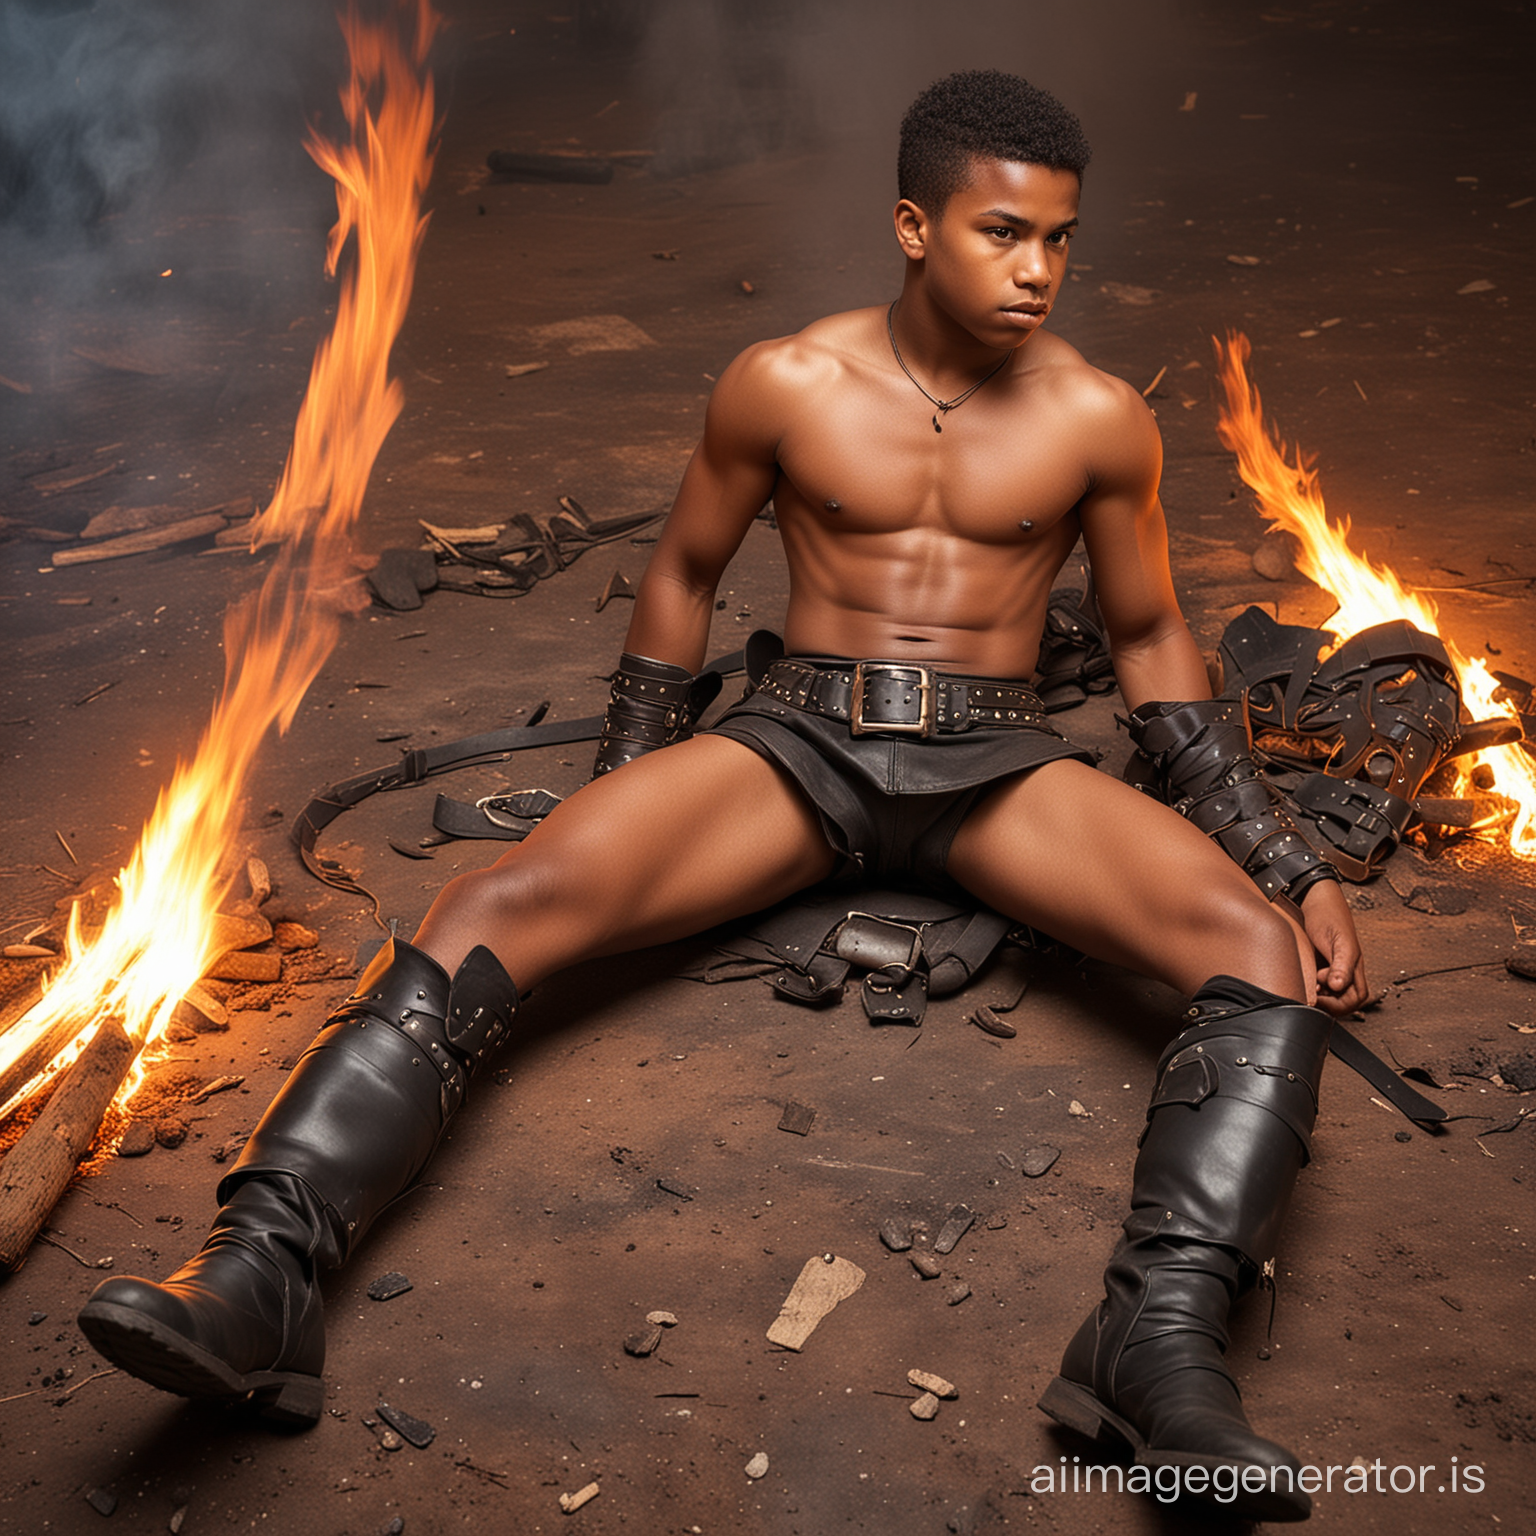 A very young black shirtless muscular teenage boy warrior, wearing a very short loincloth, a big leather belt and boots, lying on the ground, fire background.